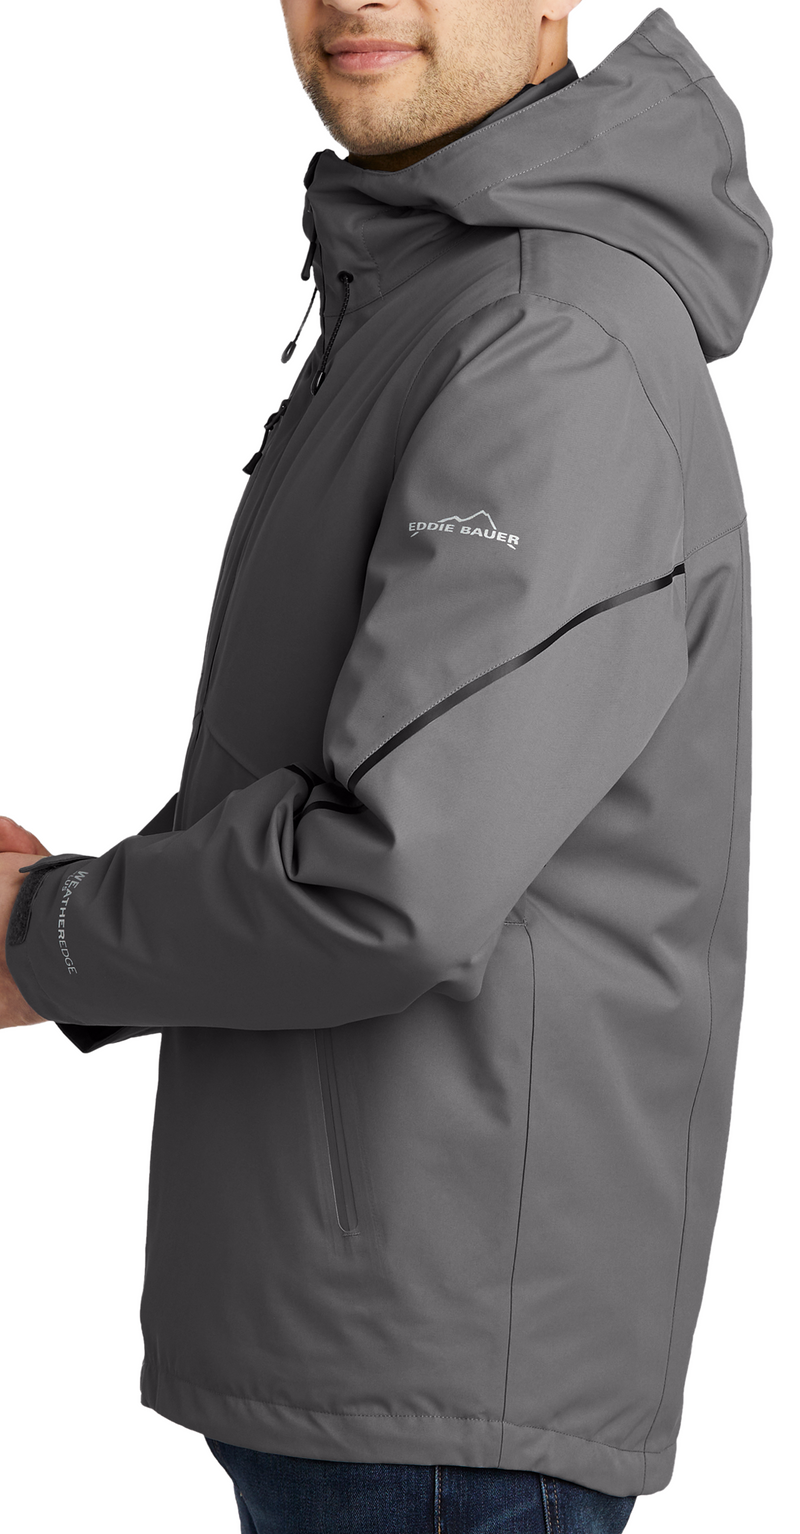 Eddie Bauer [EB556] WeatherEdge Plus 3-in-1 Jacket. Live Chat For Bulk Discounts.